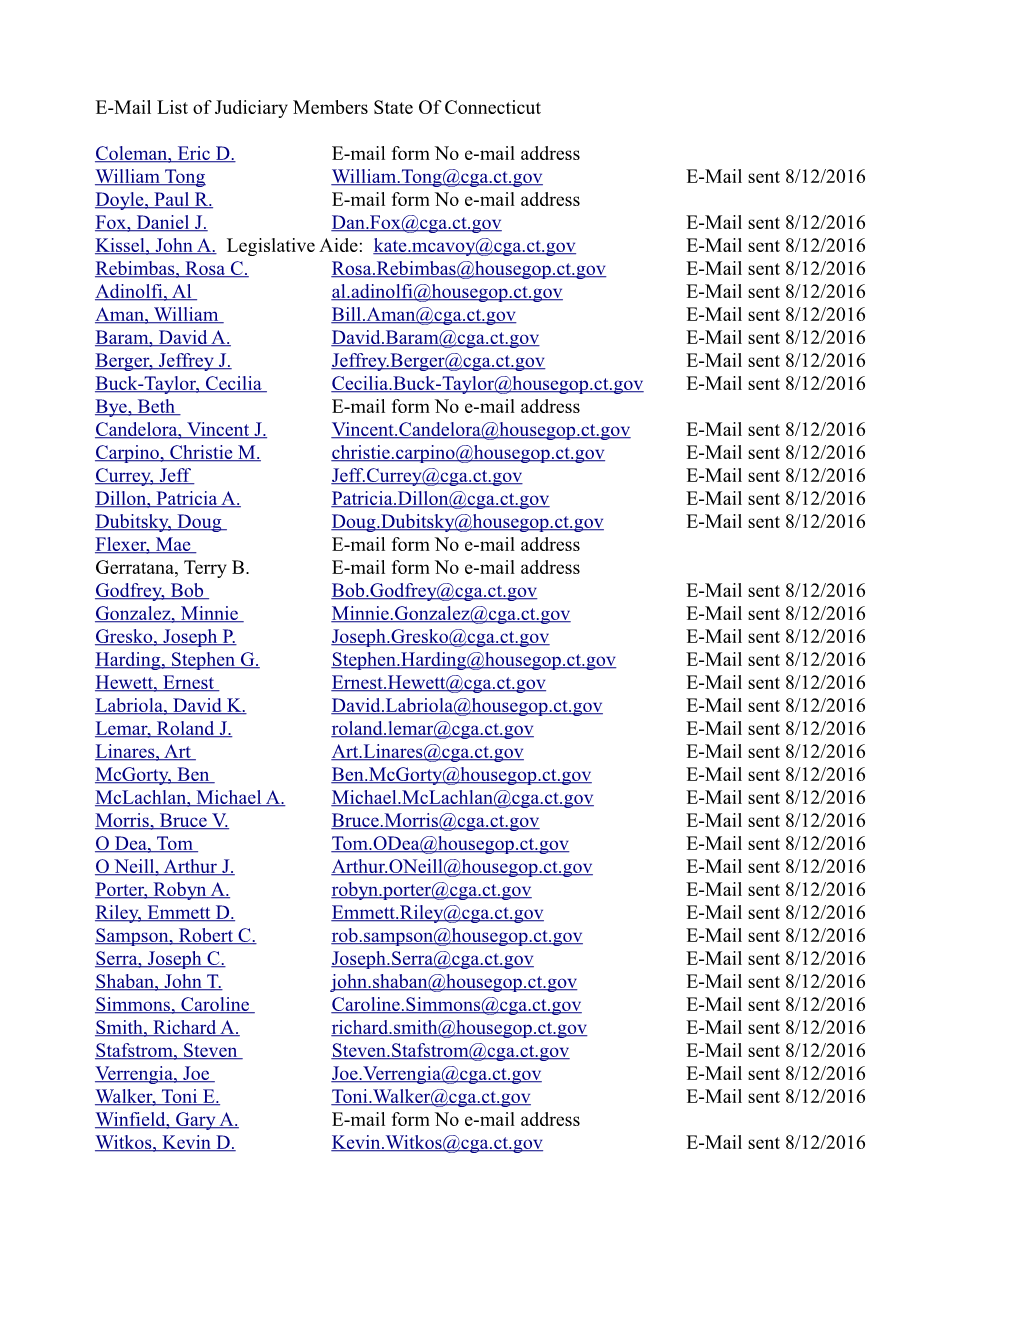 E-Mail List of Judiciary Members State of Connecticut Coleman, Eric D. E